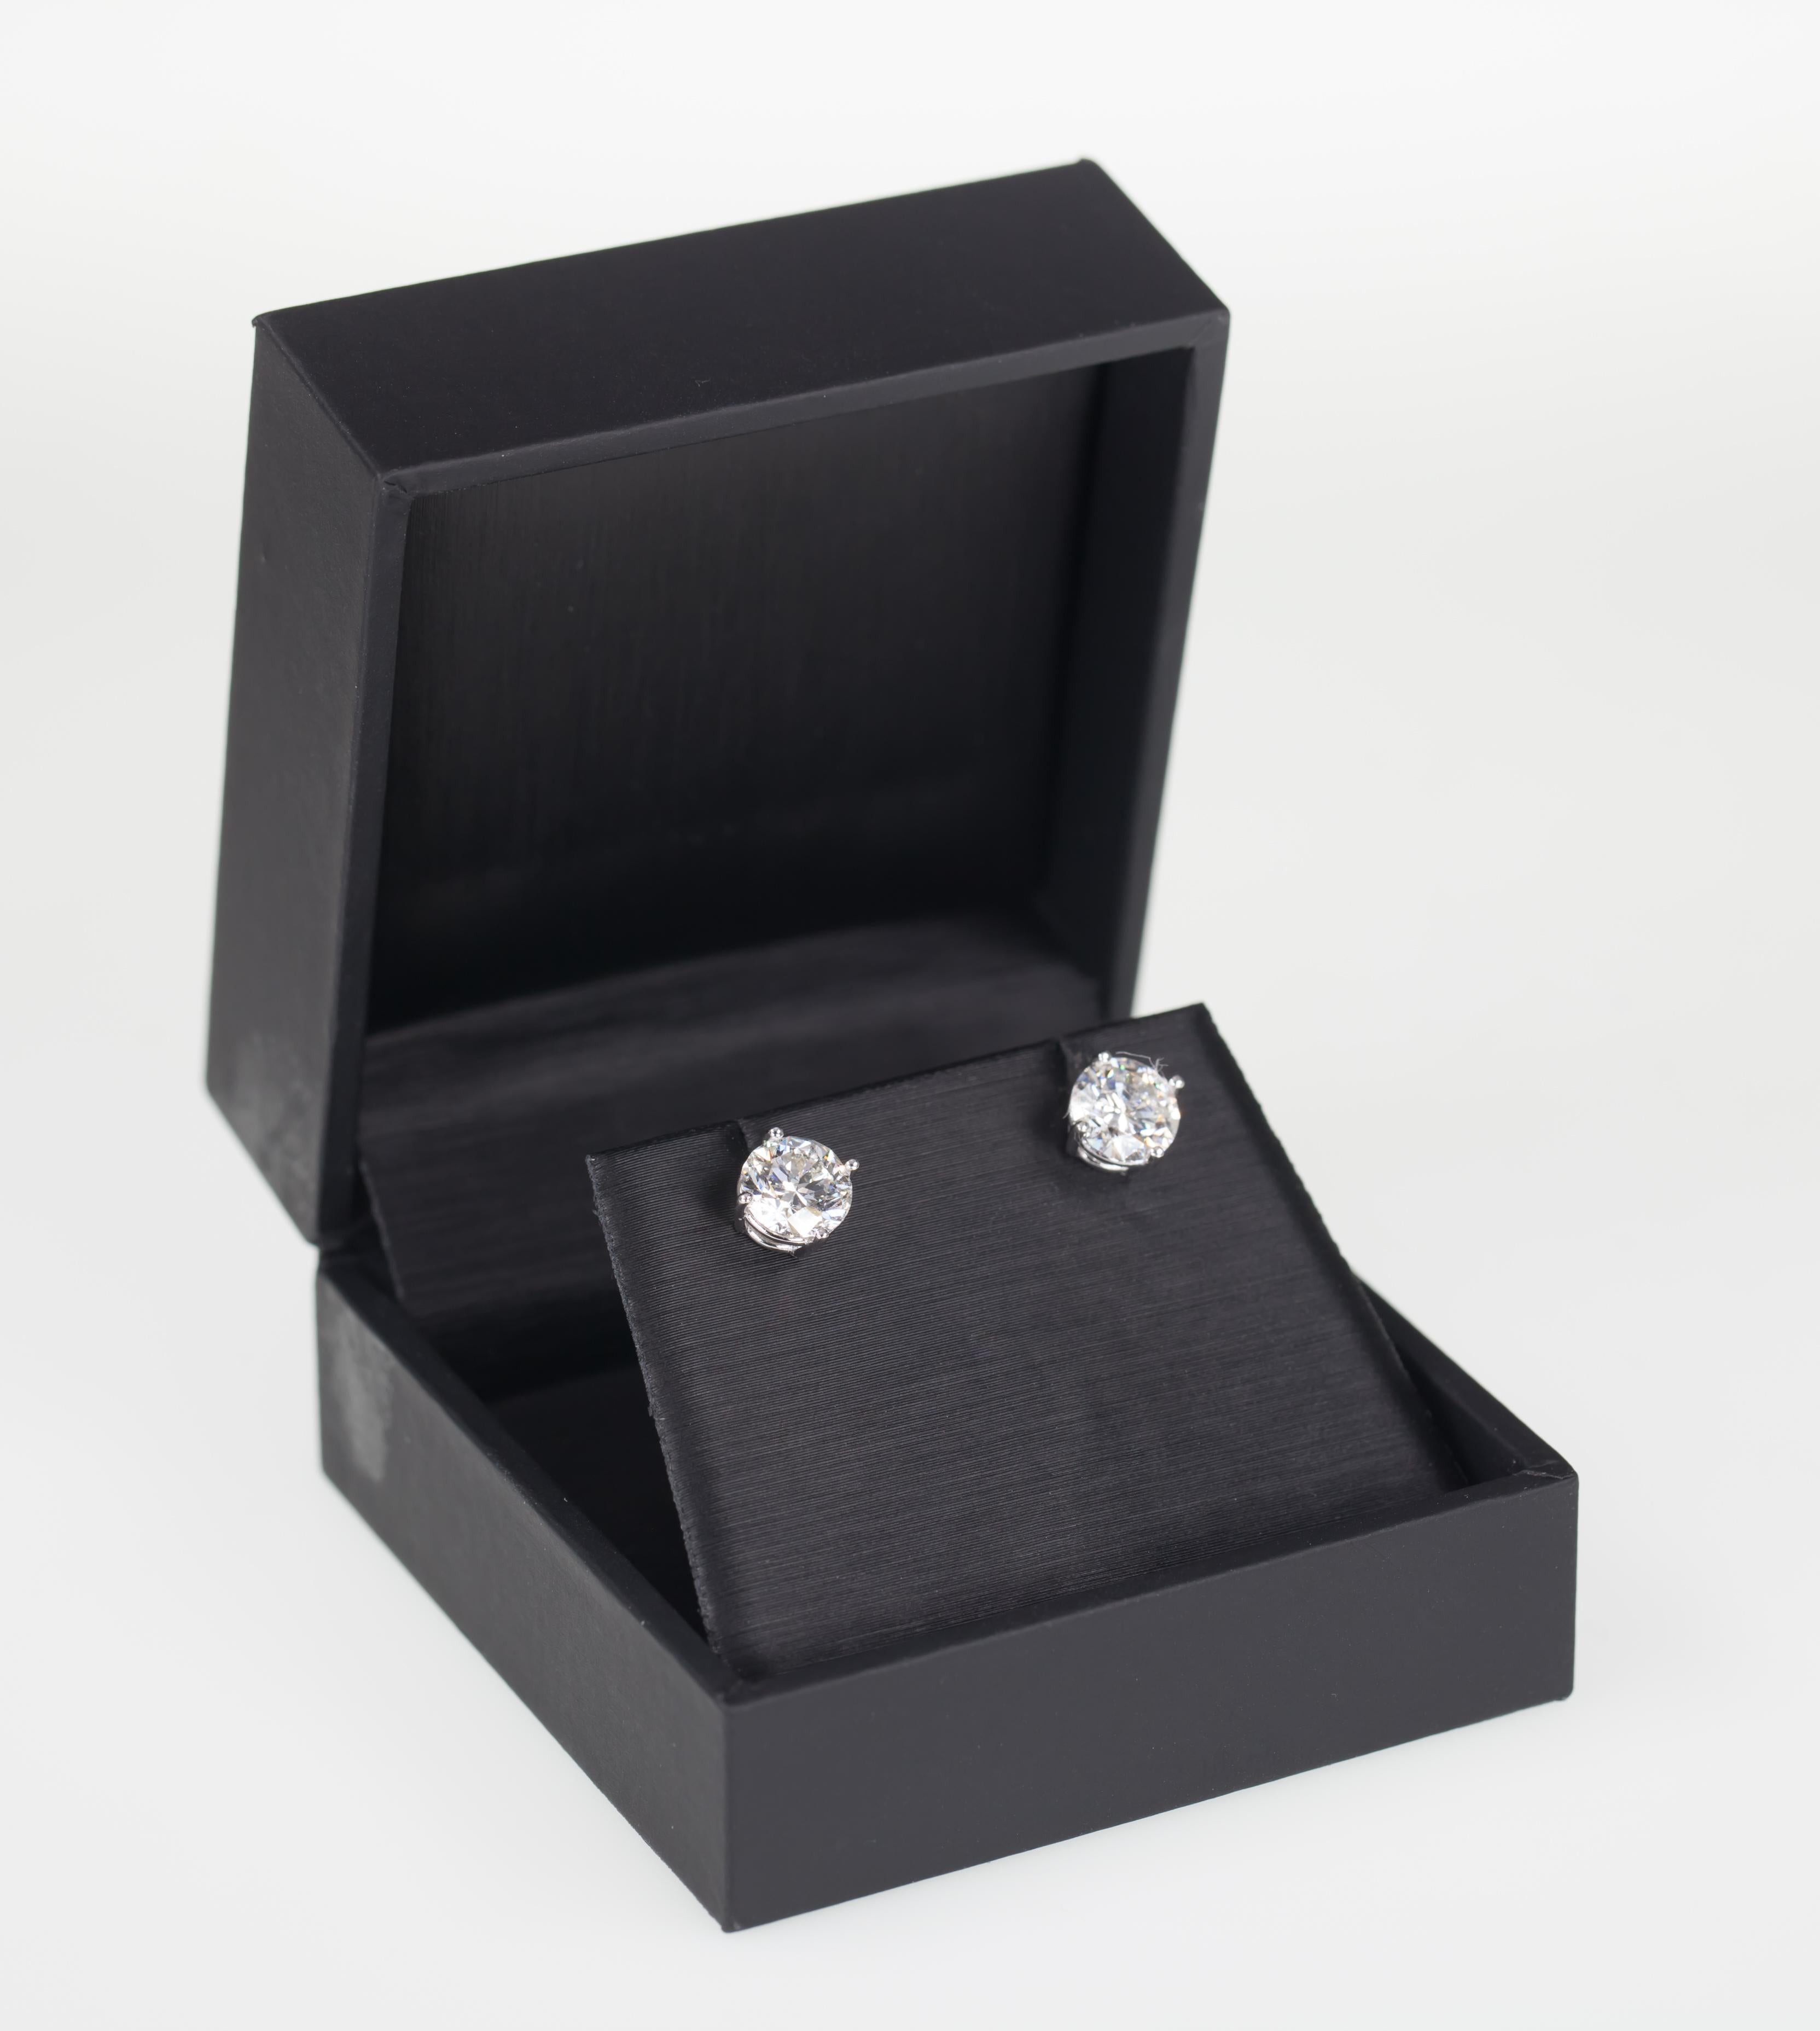 Beautiful Diamond Stud Earrings
Each in Four-Prong Setting
Total Diamond Weight = 2.10 Cts
Average Color = H
Average Clarity = SI2
Diamond Dimensions:
1) 6.5 mm x 3.82 mm
2) 6.40 mm x 4.15 mm
Total Mass = 1.7 grams
Beautiful Gift!